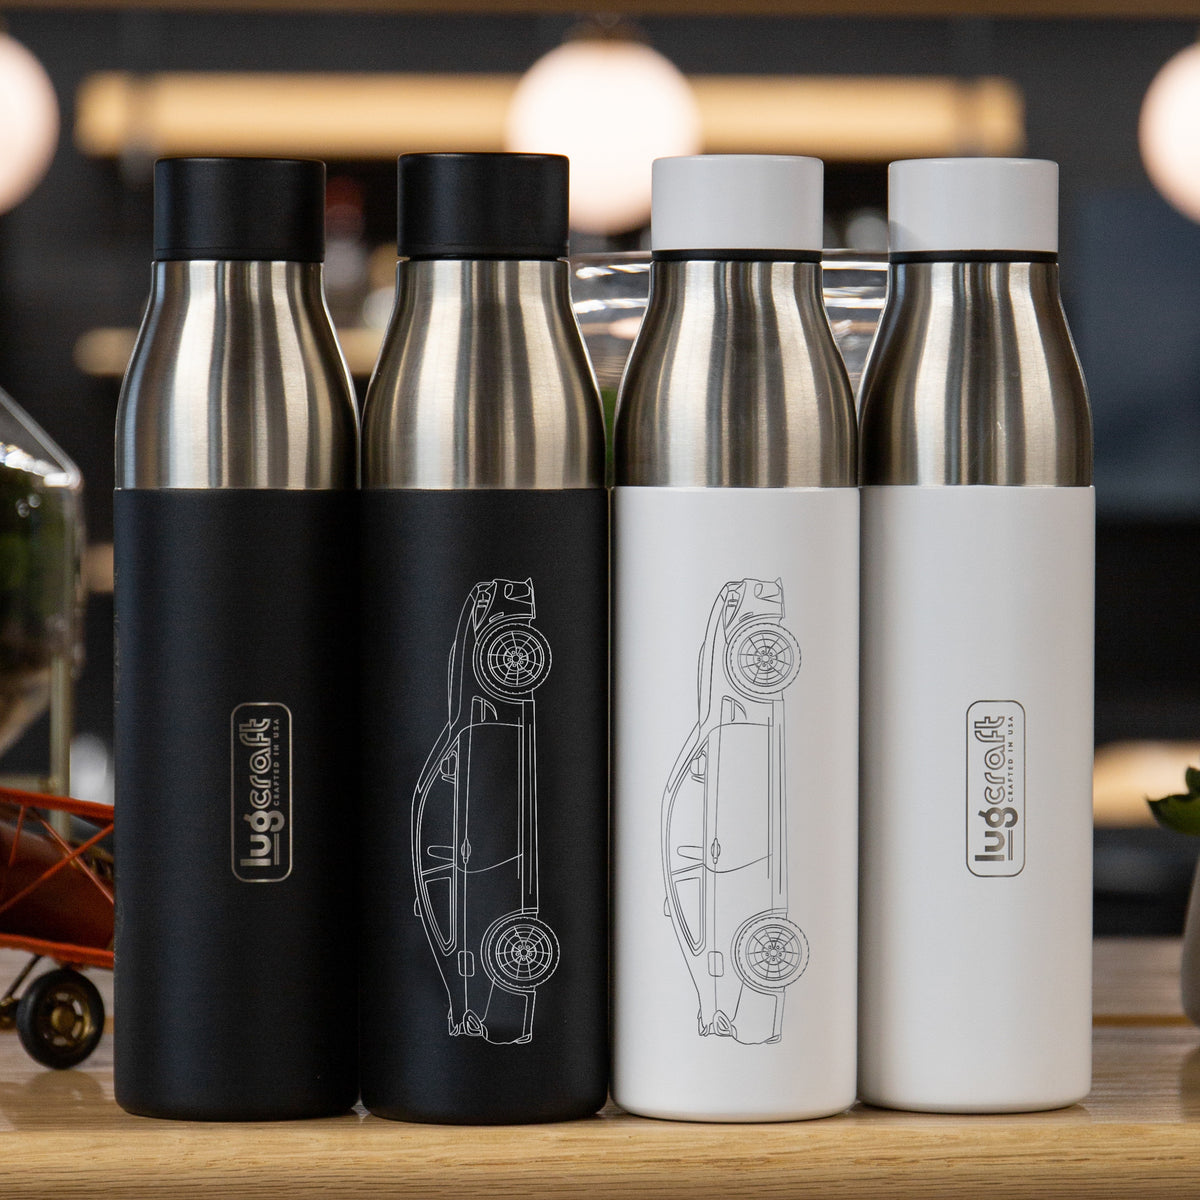 BMW M4 F82 Insulated Stainless Steel Water Bottle - 21 oz